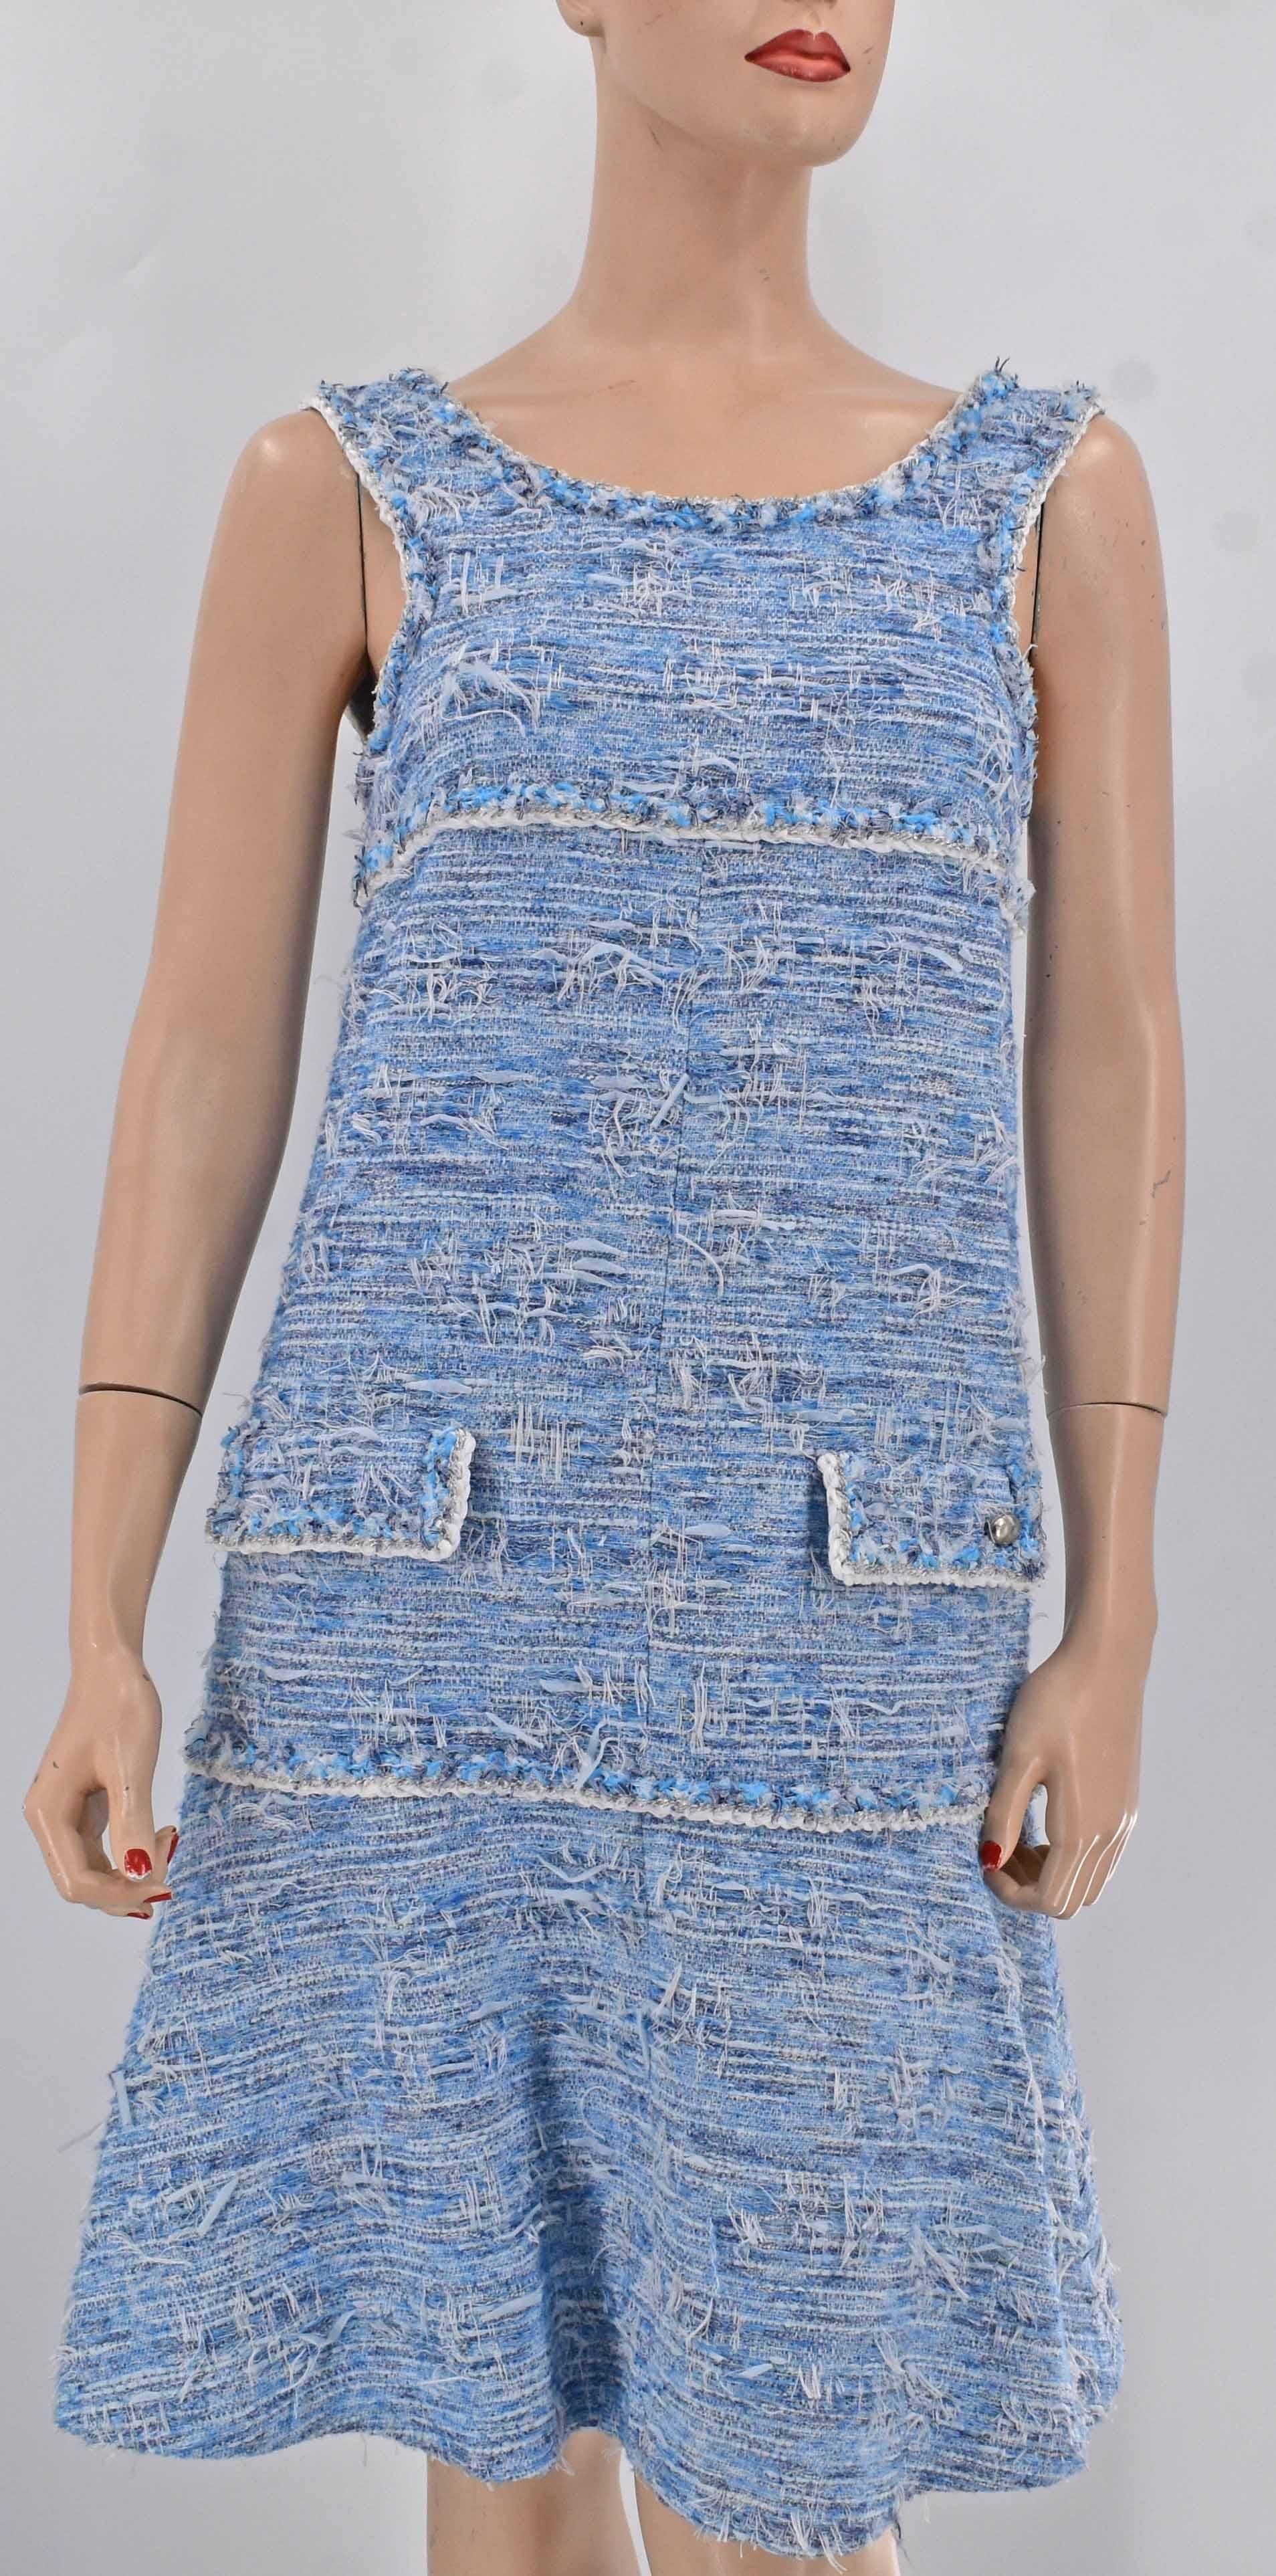 Chanel fantasy tweed dress with Chanel interlocking CC logo emblem. Color is beautiful blend of light blue and white. It retails $6200 before tax. 